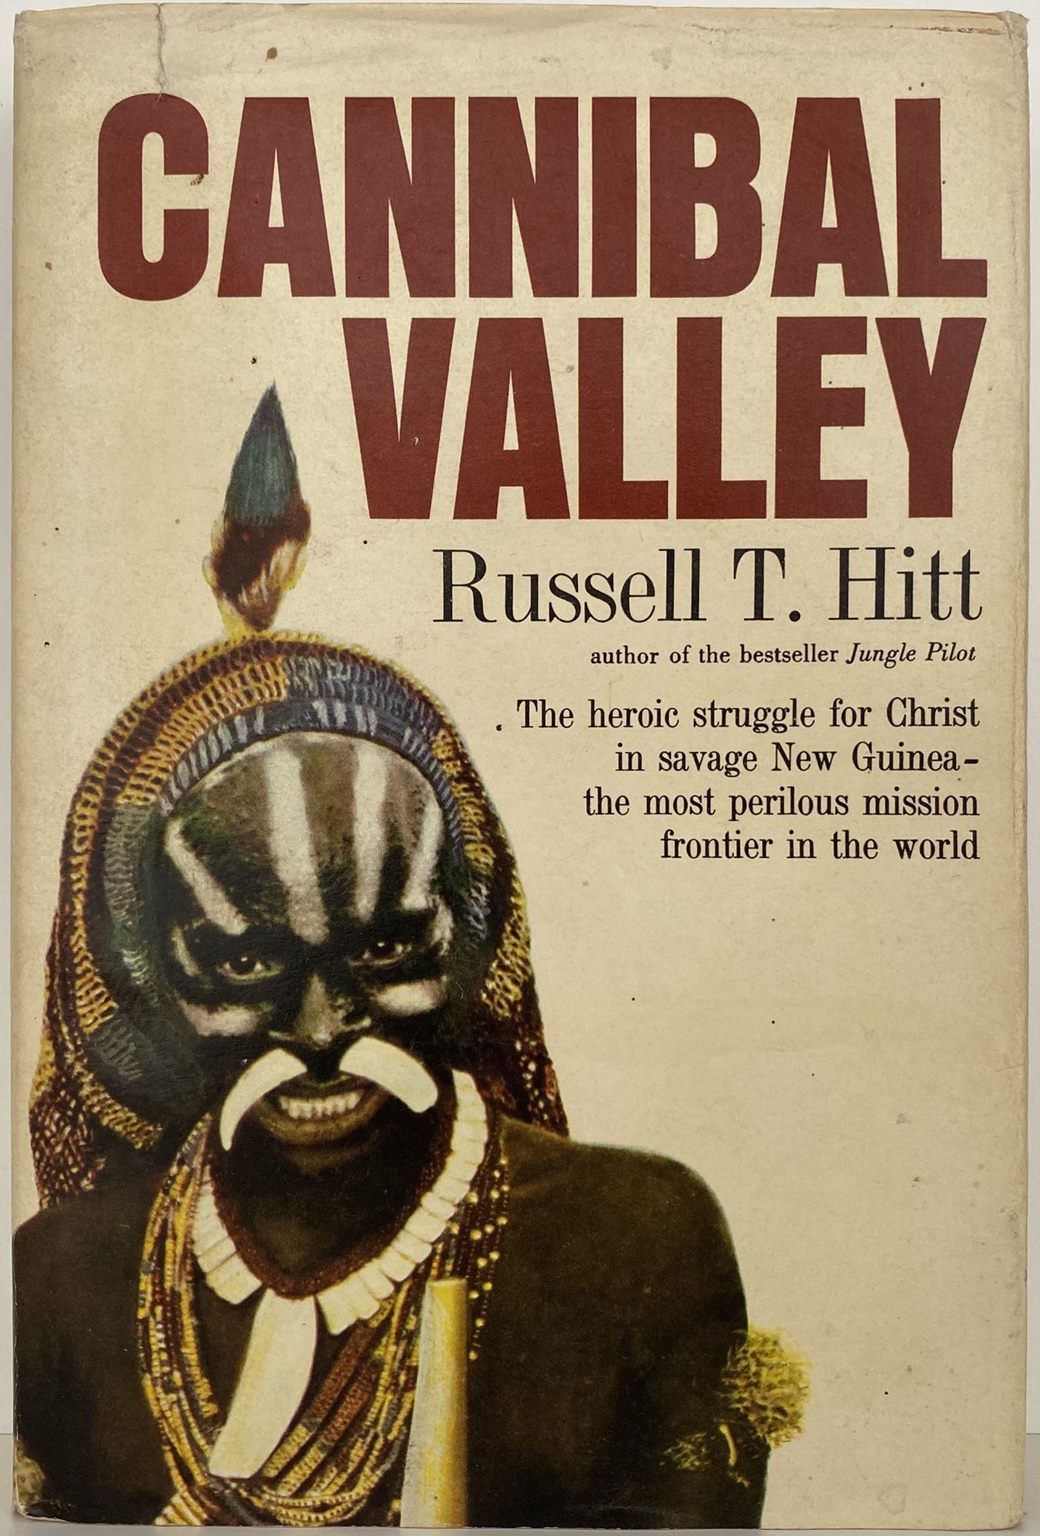 CANNIBAL VALLEY: The Heroic struggle for Christ in New Guinea